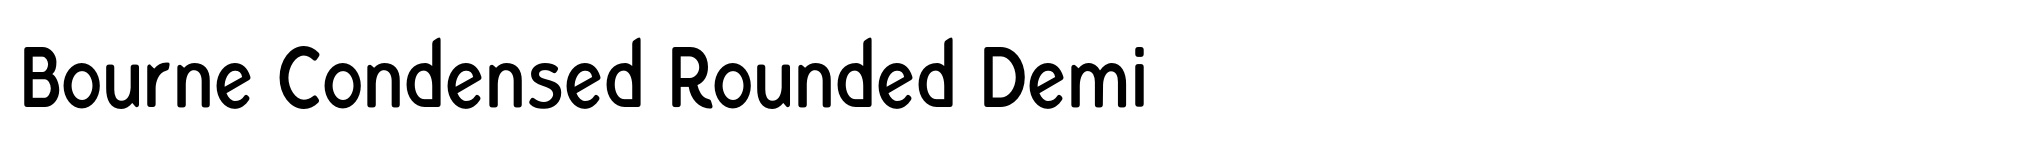 Bourne Condensed Rounded Demi image